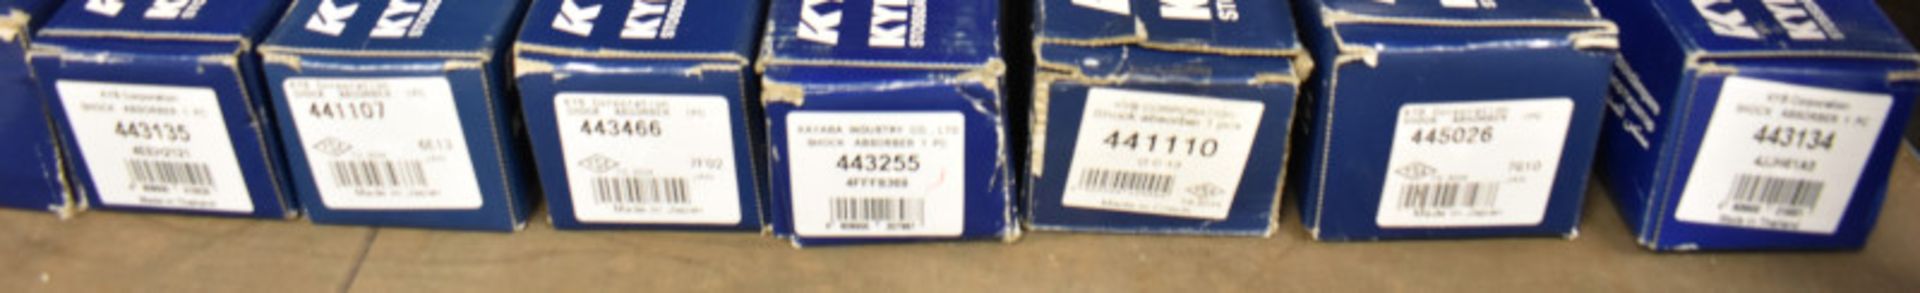 17x KYB Premium Gas Shock Absorbers - Please see pictures for examples of model numbers - Image 4 of 4